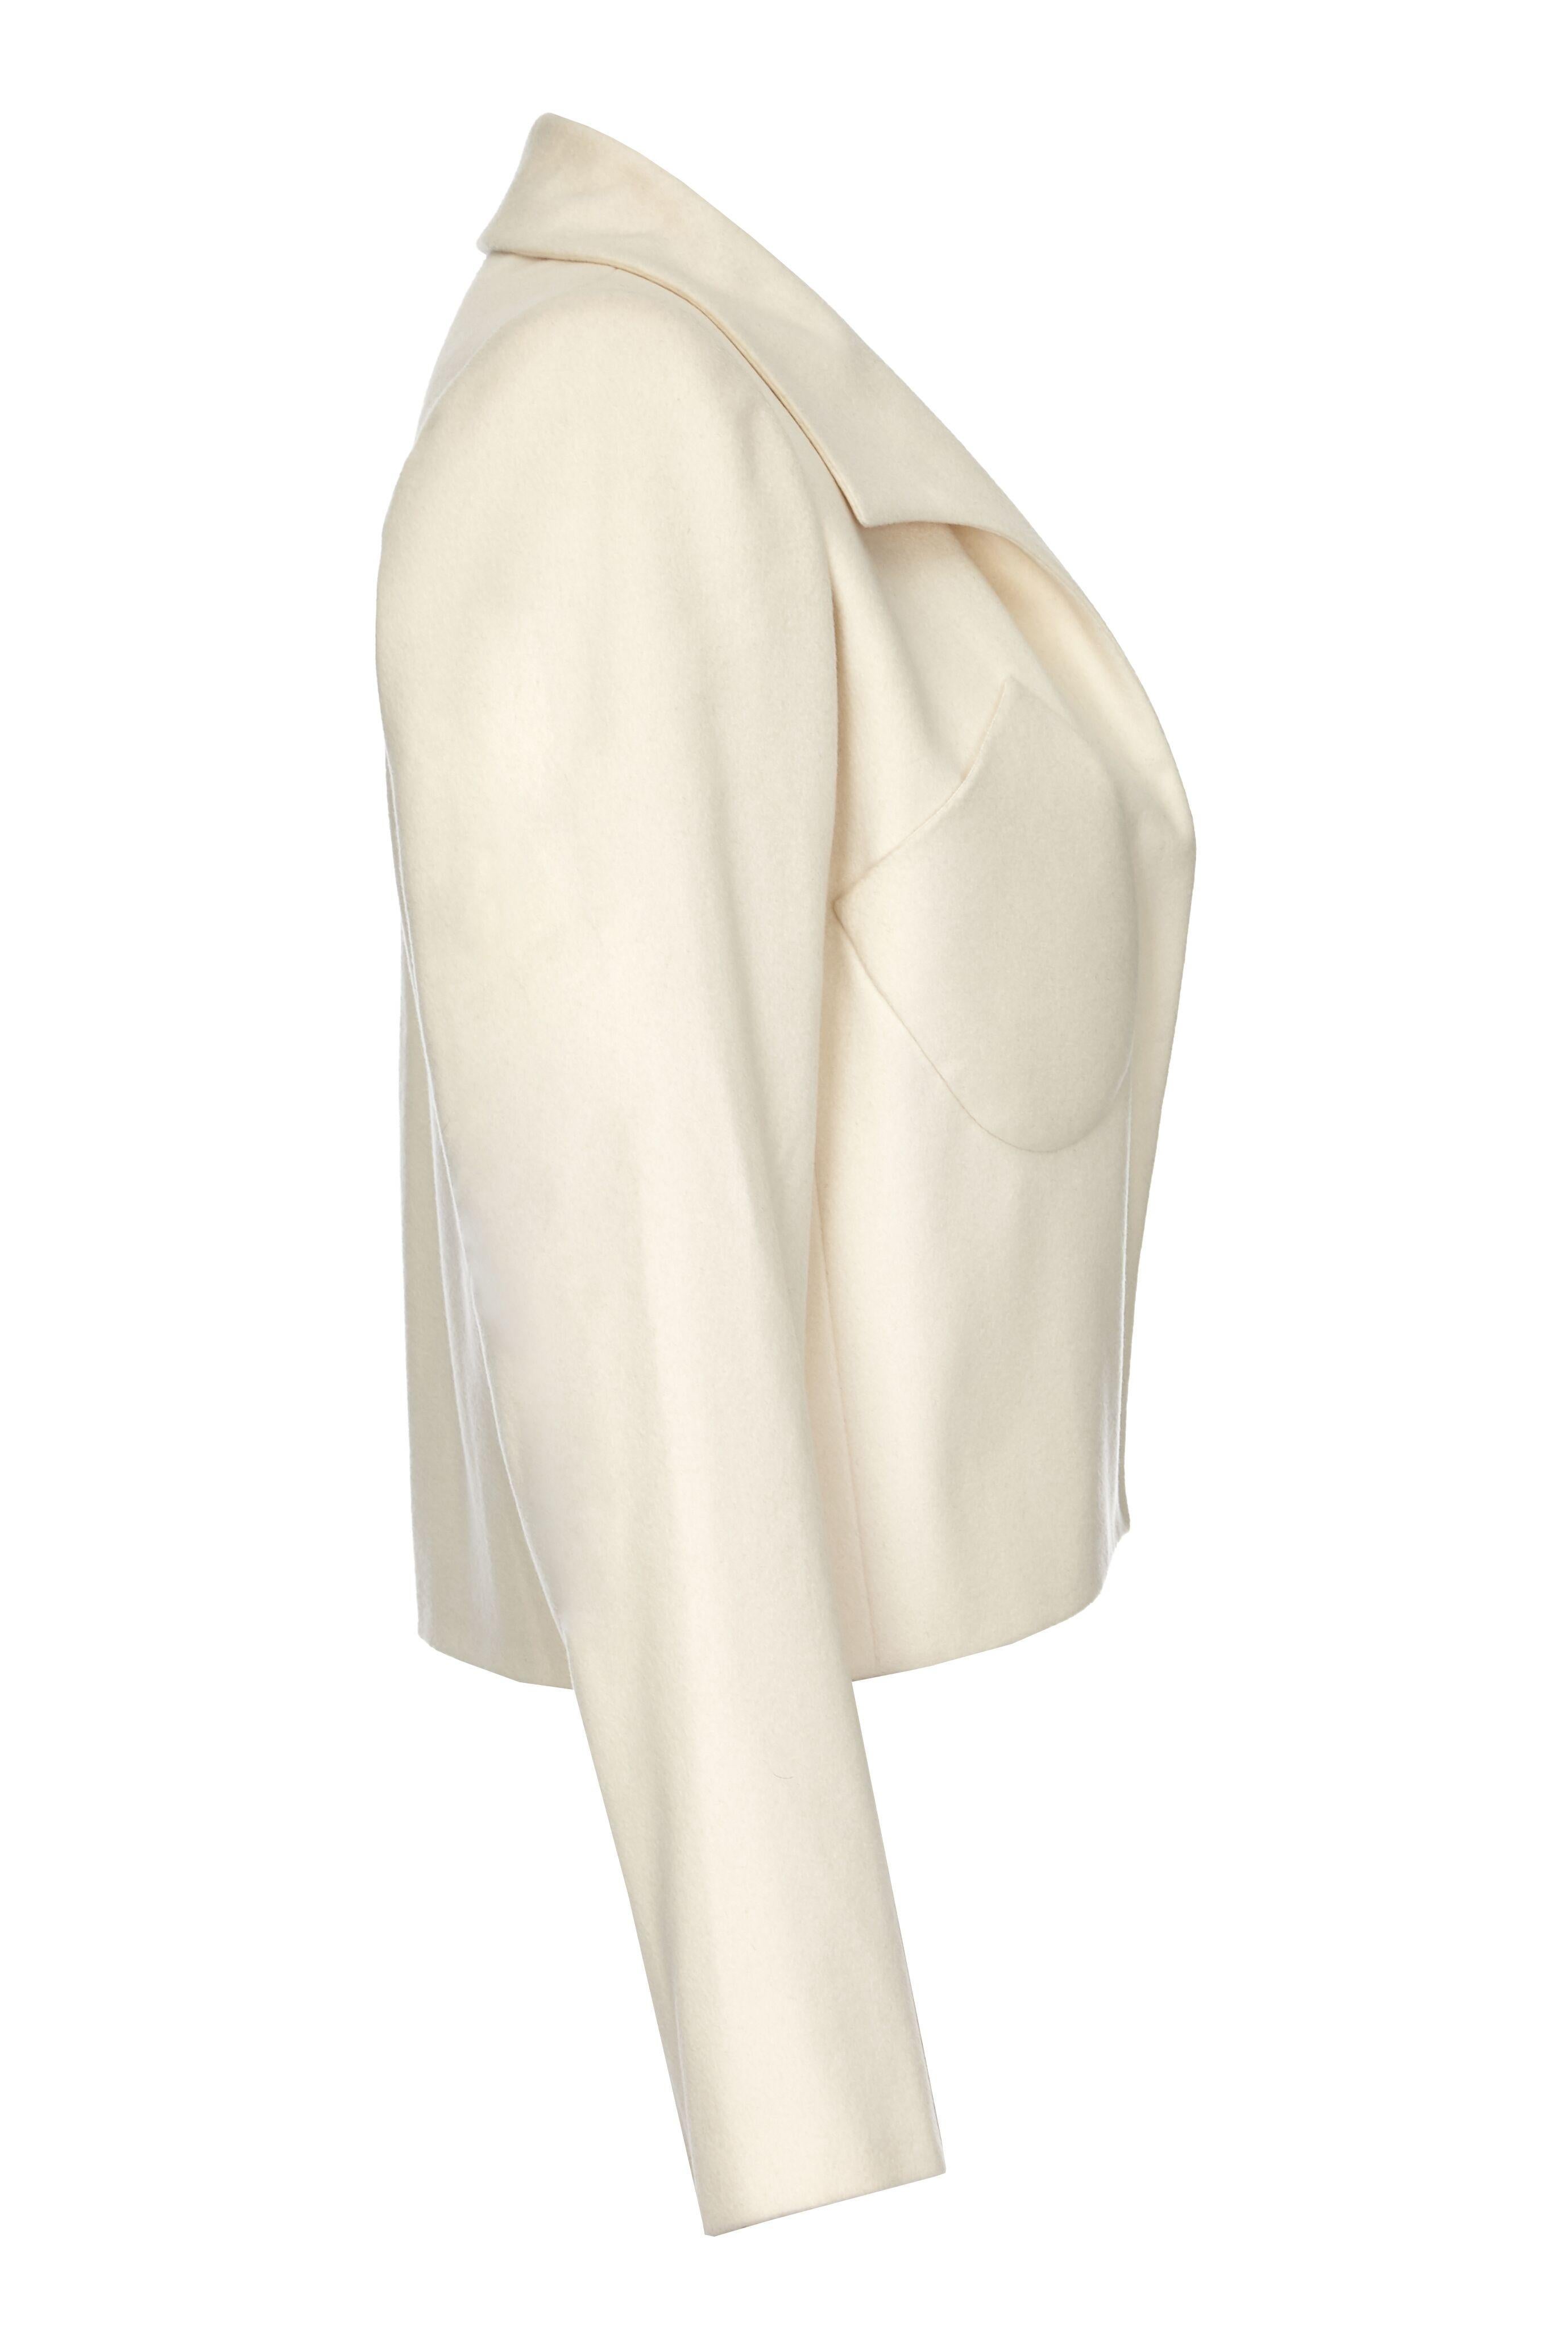 Beige Tom Ford For Yves Saint Laurent Ivory Cashmere Structured Jacket Circa 1999